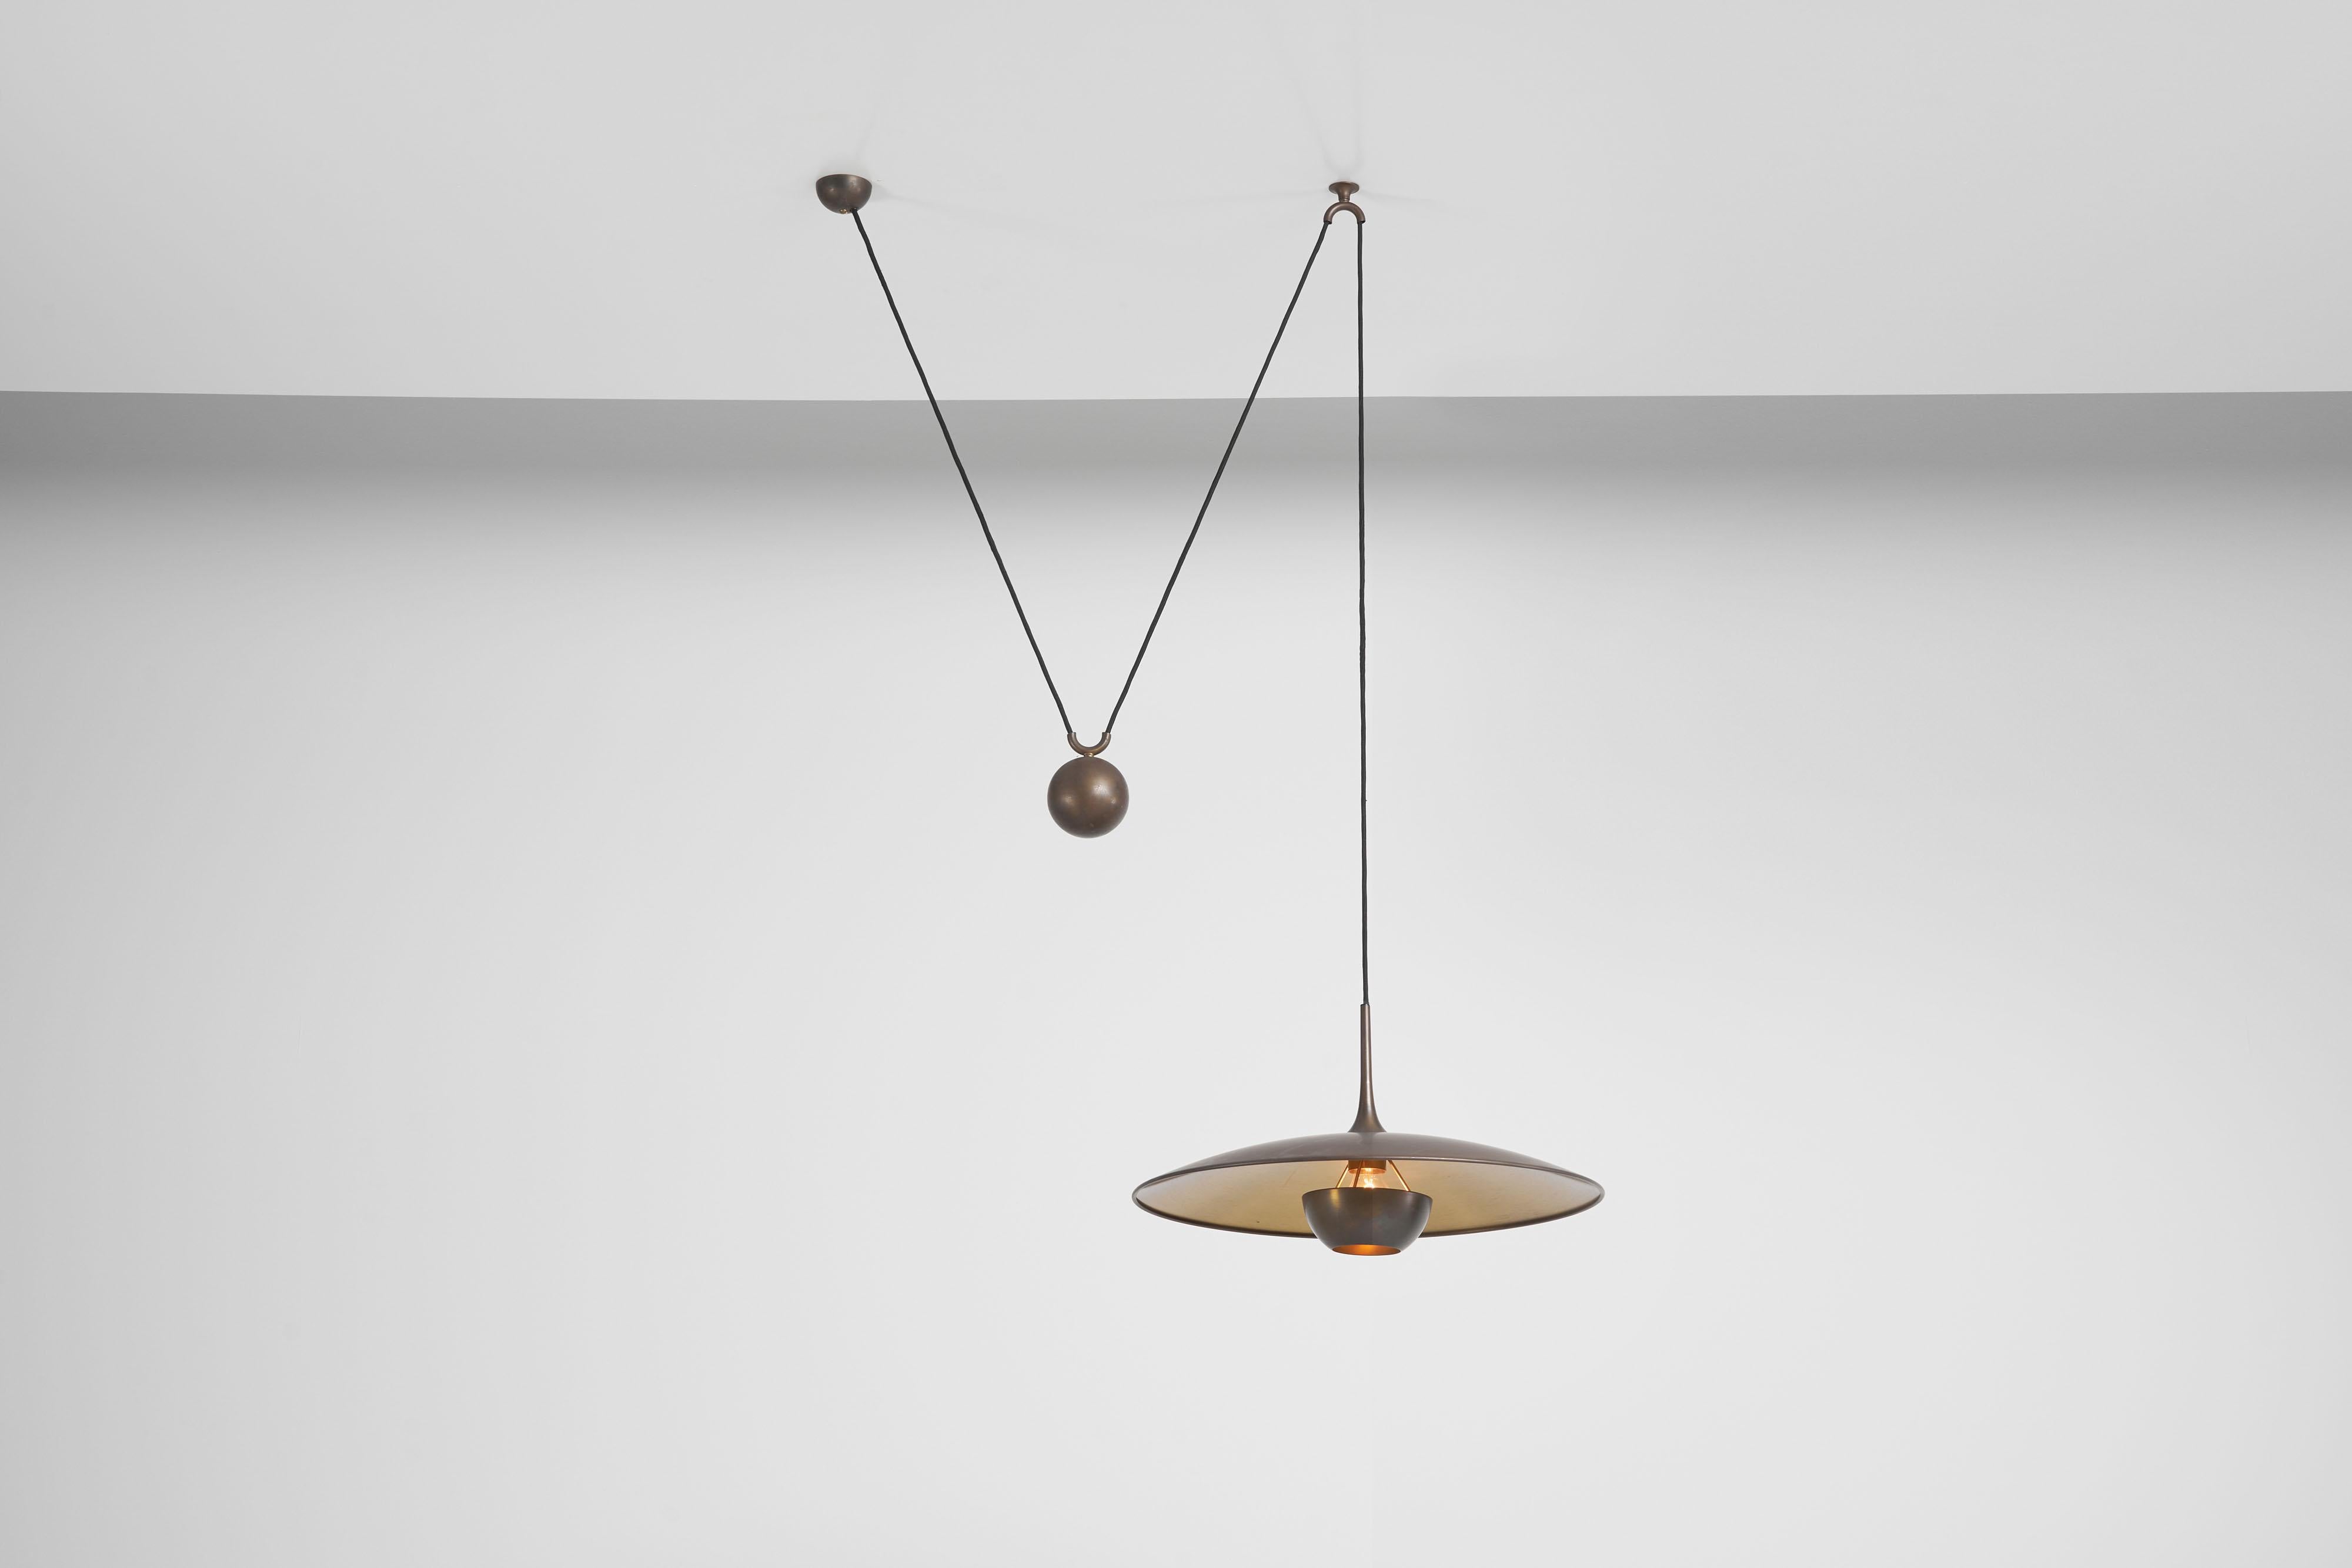 Stunning Onos 55 pendant lamp designed by Florian Schulz manufactured in Germany in 1970. Made from beautiful patinated brass, the lamp features a weighty spherical ball that serves a dual purpose: adjusting the lamp's height and width to your